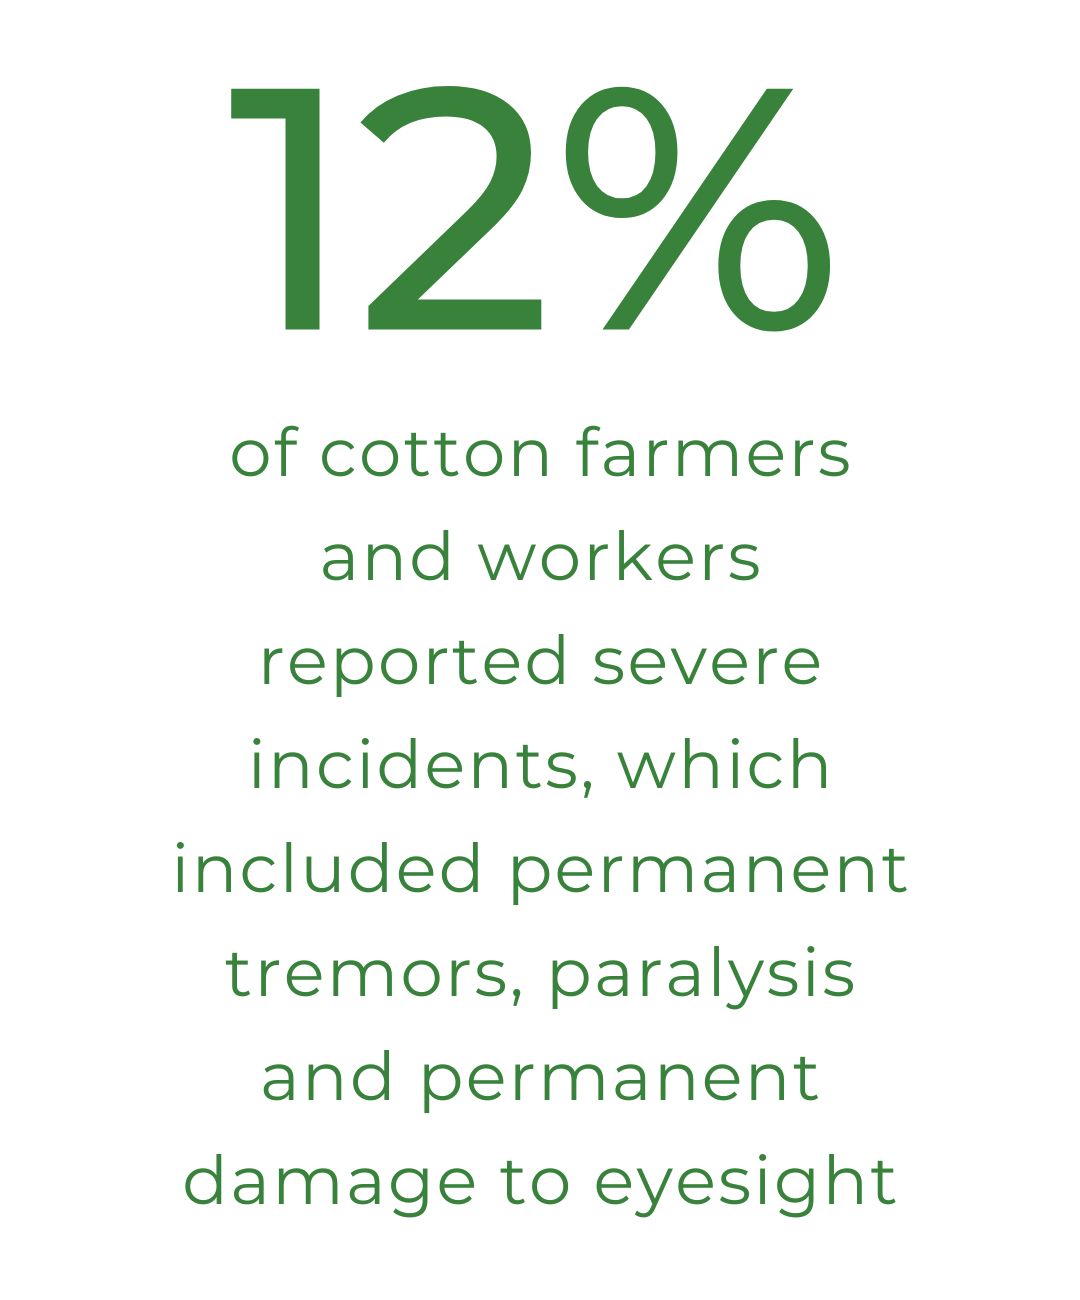 12% of cotton farmers reported severe acute pesticide poisoning incidents